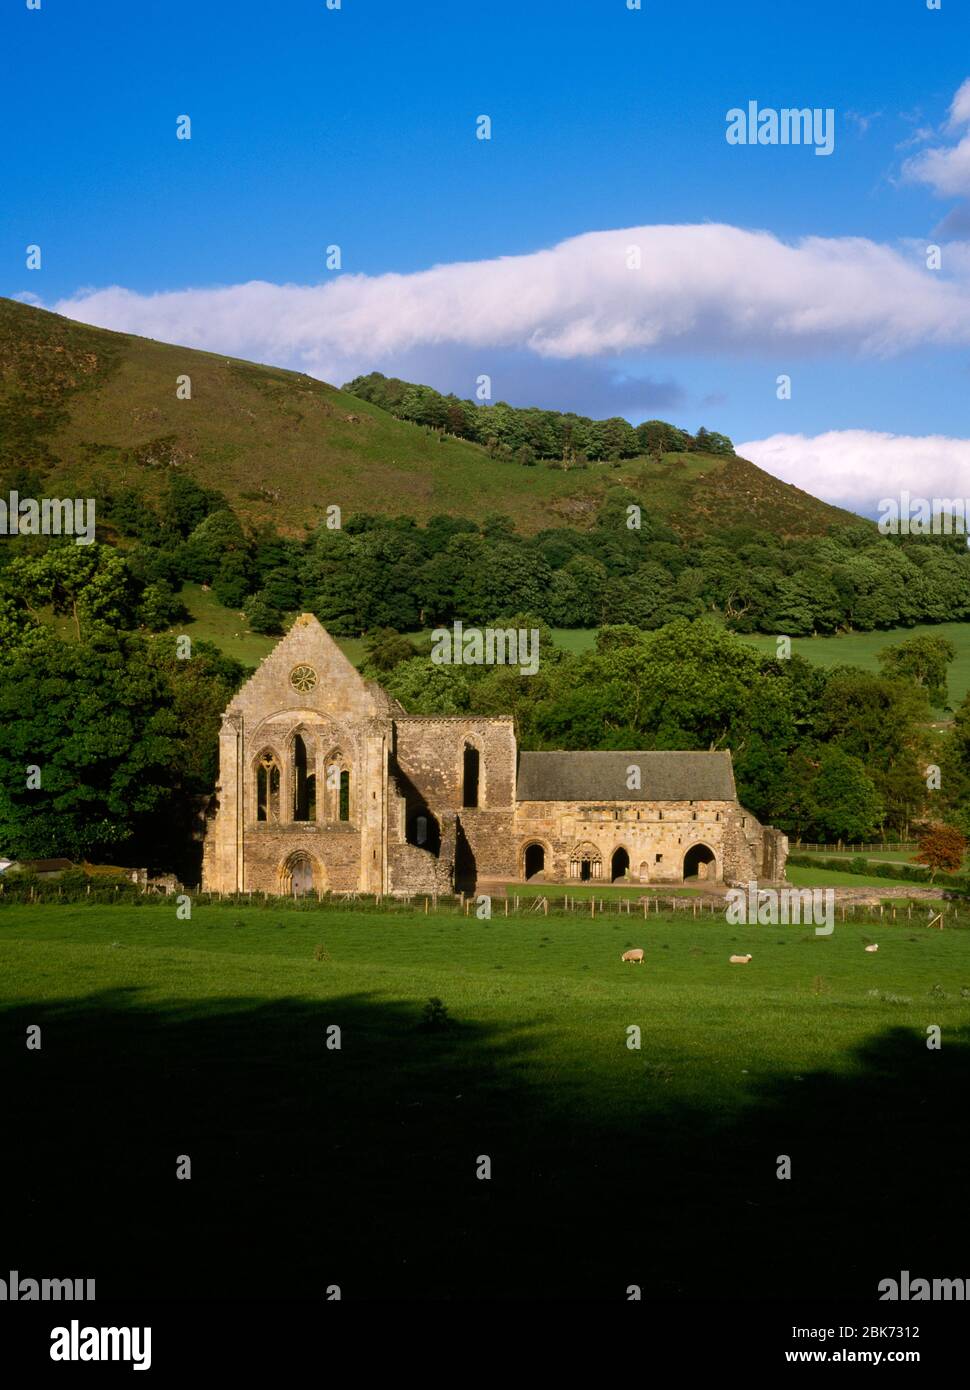 Valle Crucis Abbey seen from road, Llangollen, Denbighshire, Wales. Ruined medieval Cistertian abbey Stock Photo